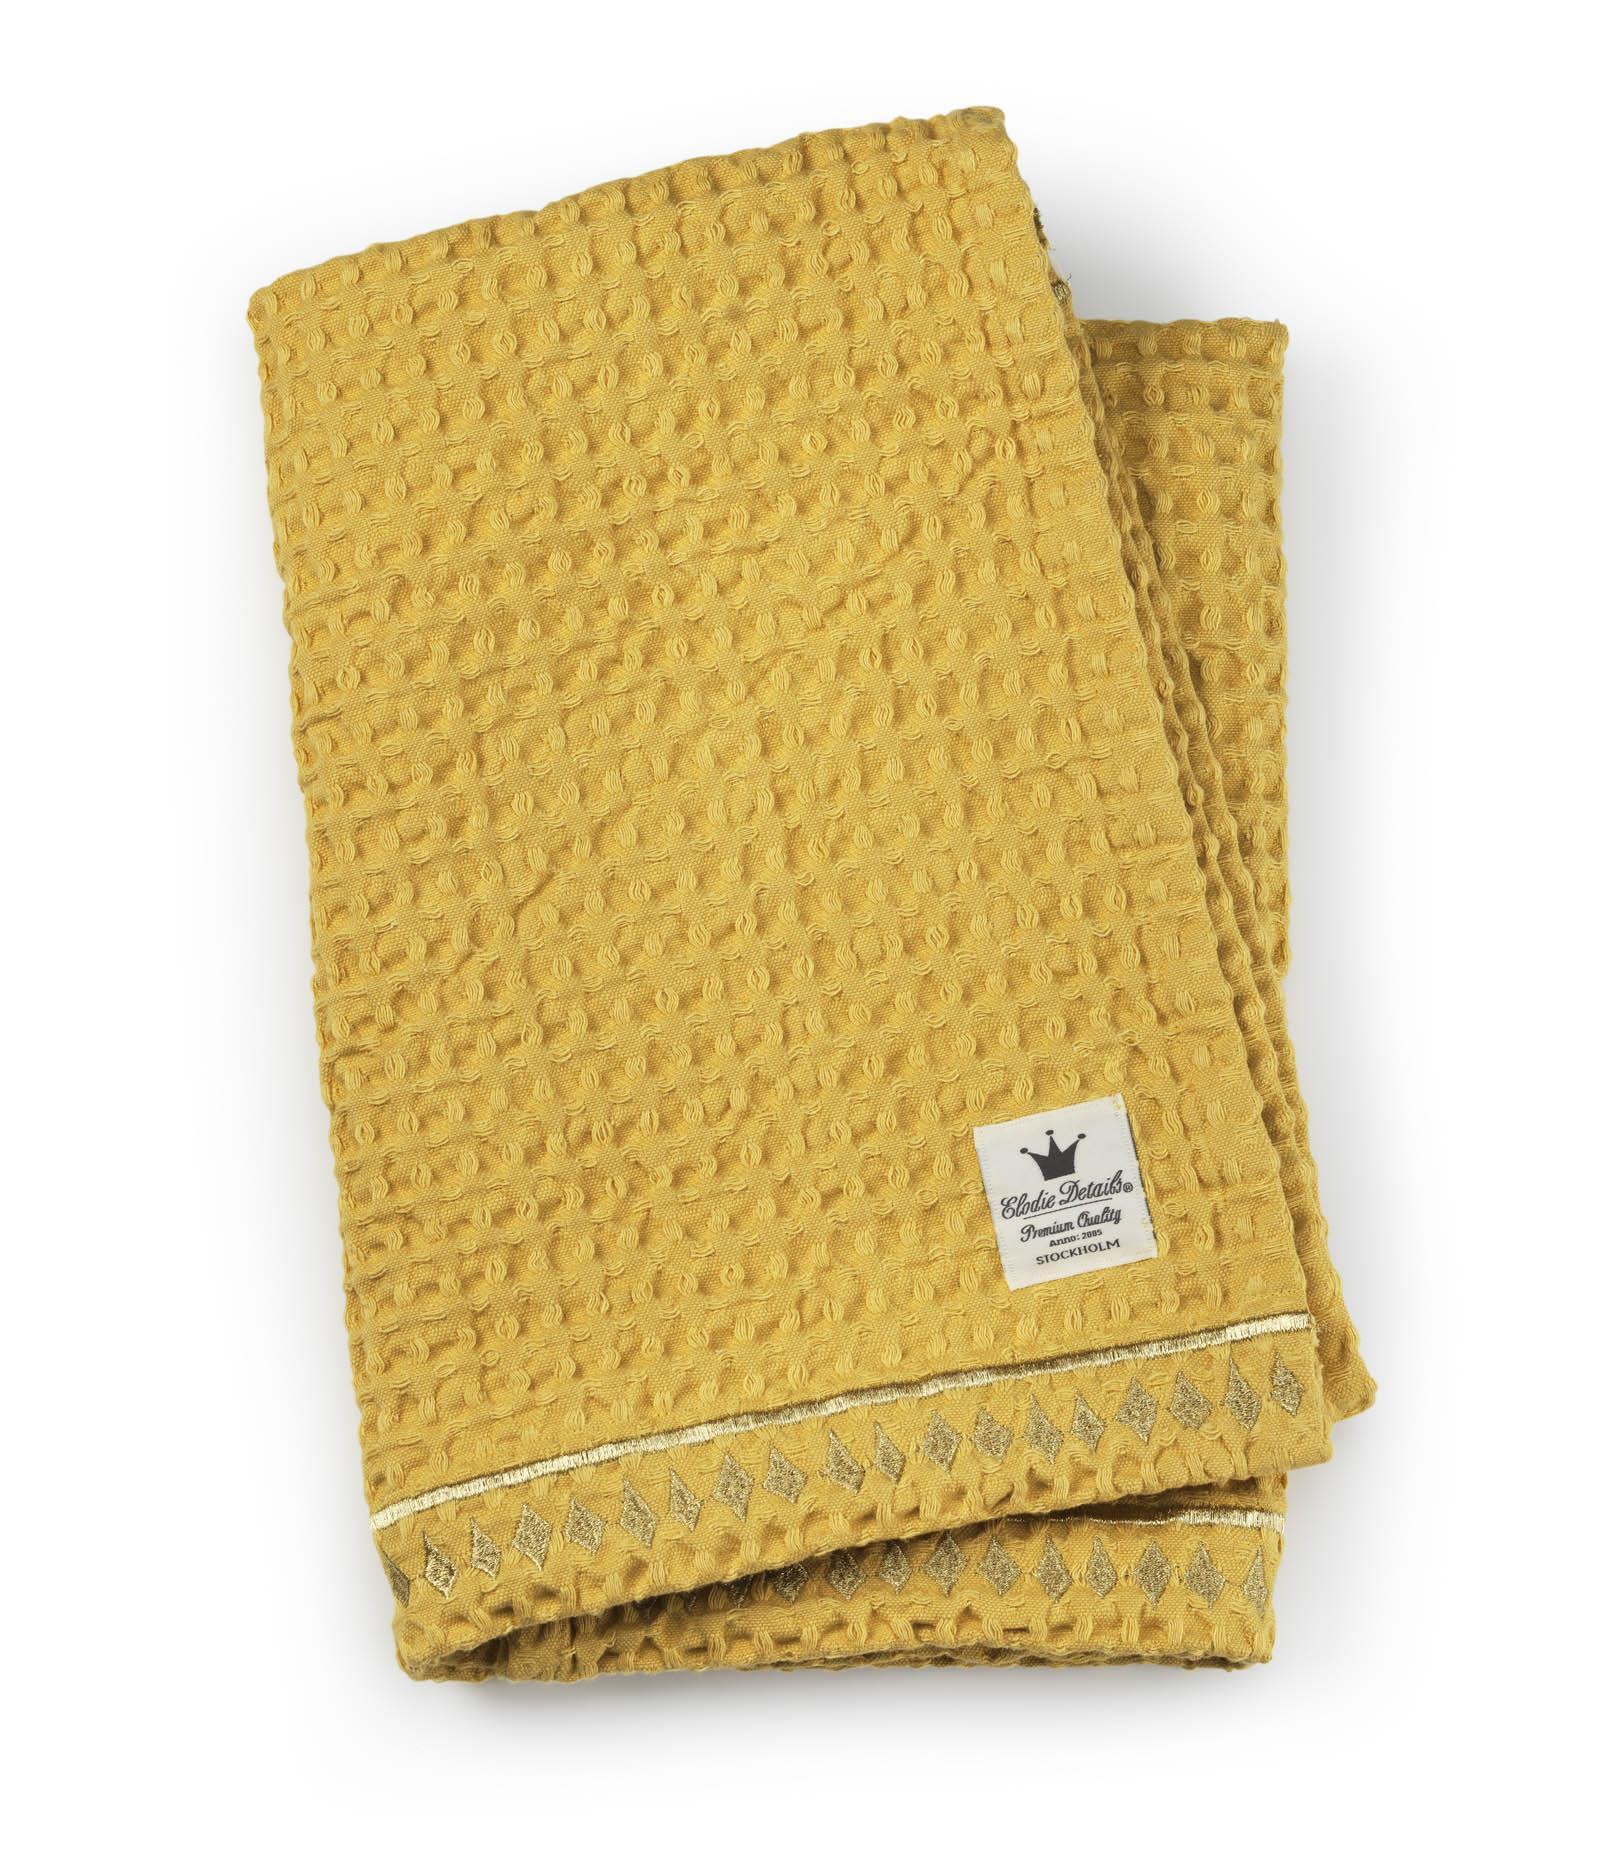 Elodie Details Cotton waffle blanket - Sweet Honey Yellow one size - Elodie Details